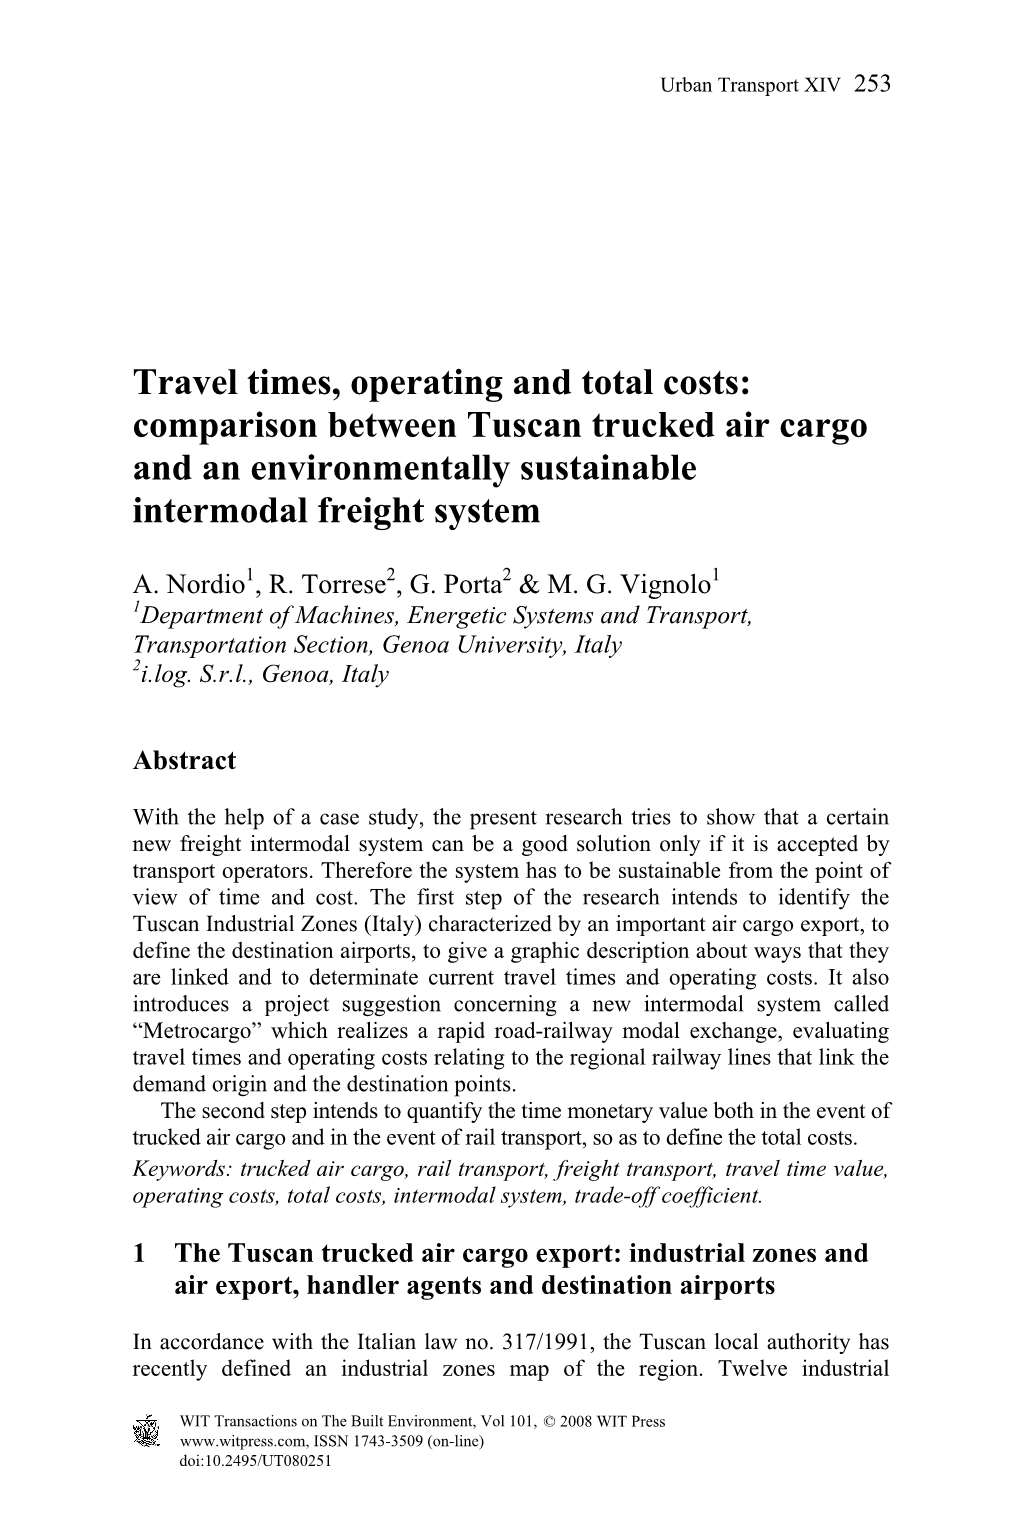 Comparison Between Tuscan Trucked Air Cargo and an Environmentally Sustainable Intermodal Freight System